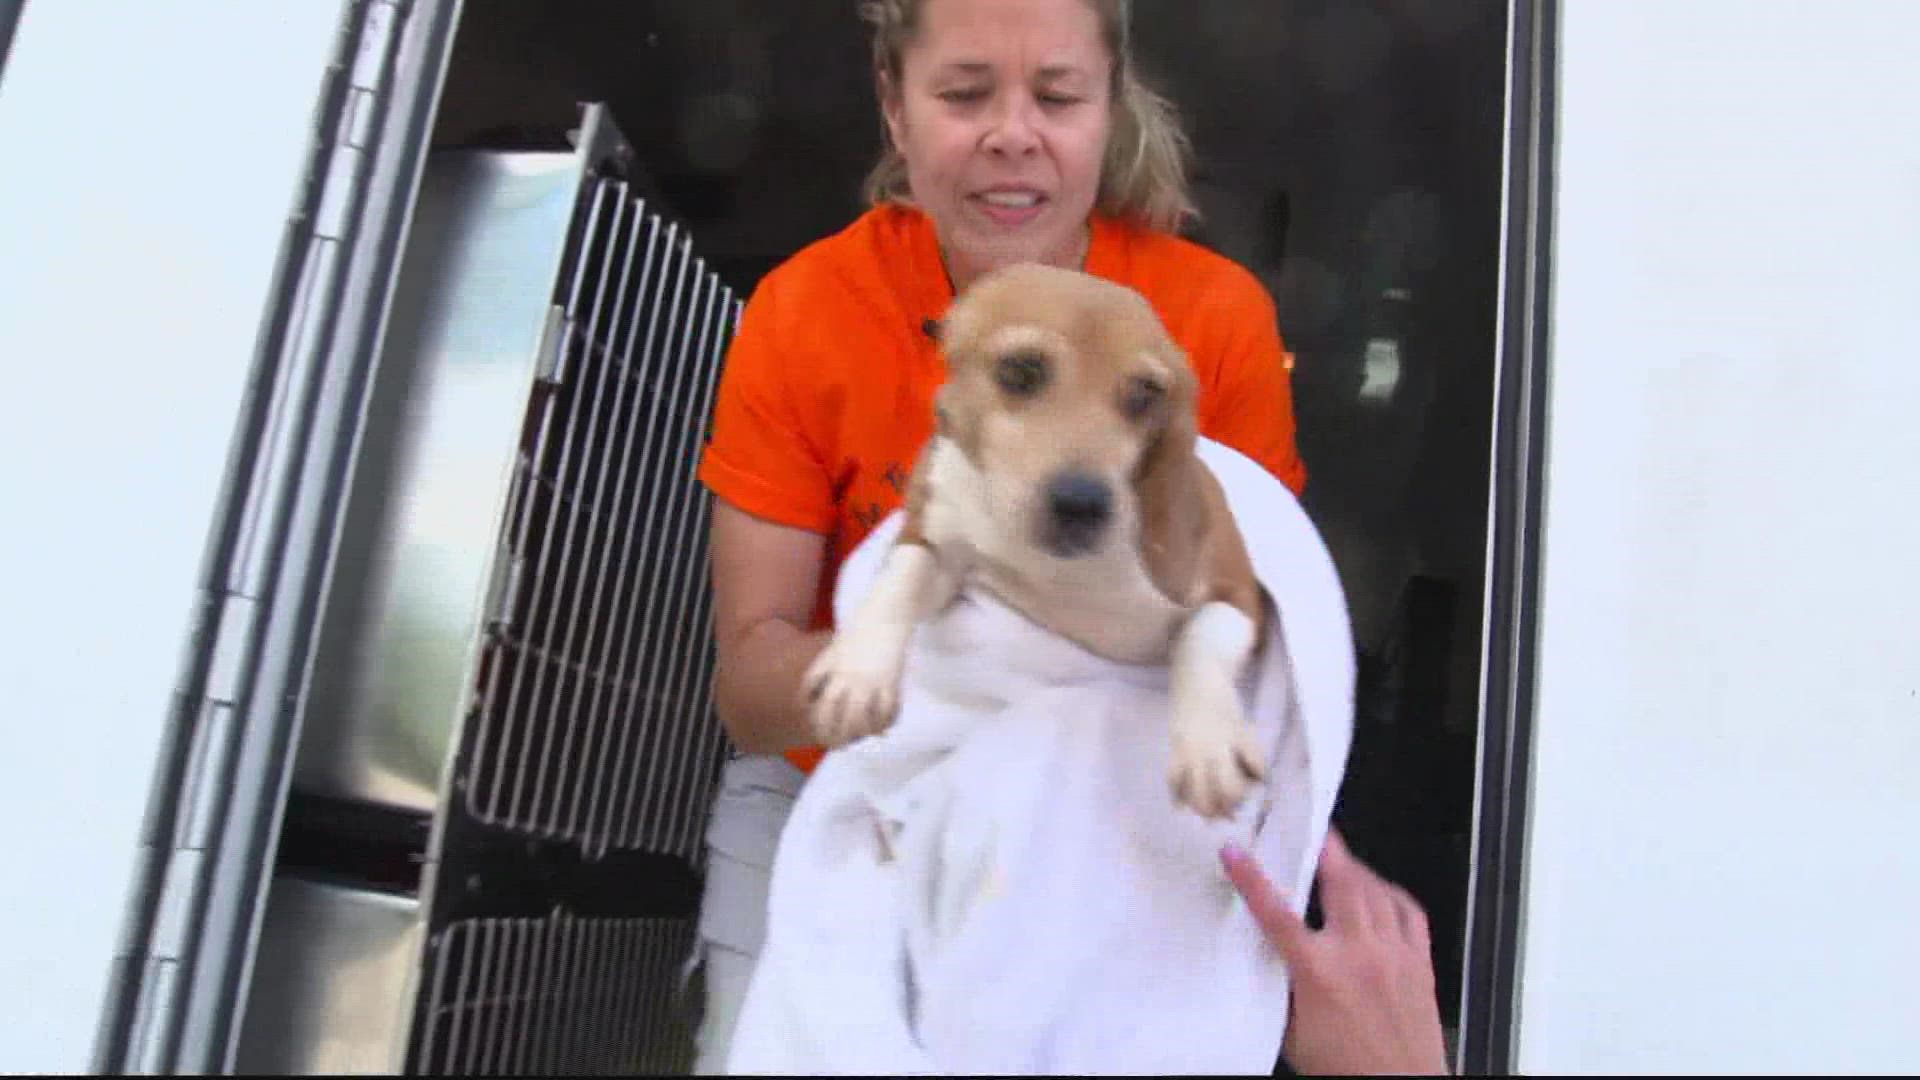 Mission accomplished: The last group of beagles were taken from the facility on Sept. 1